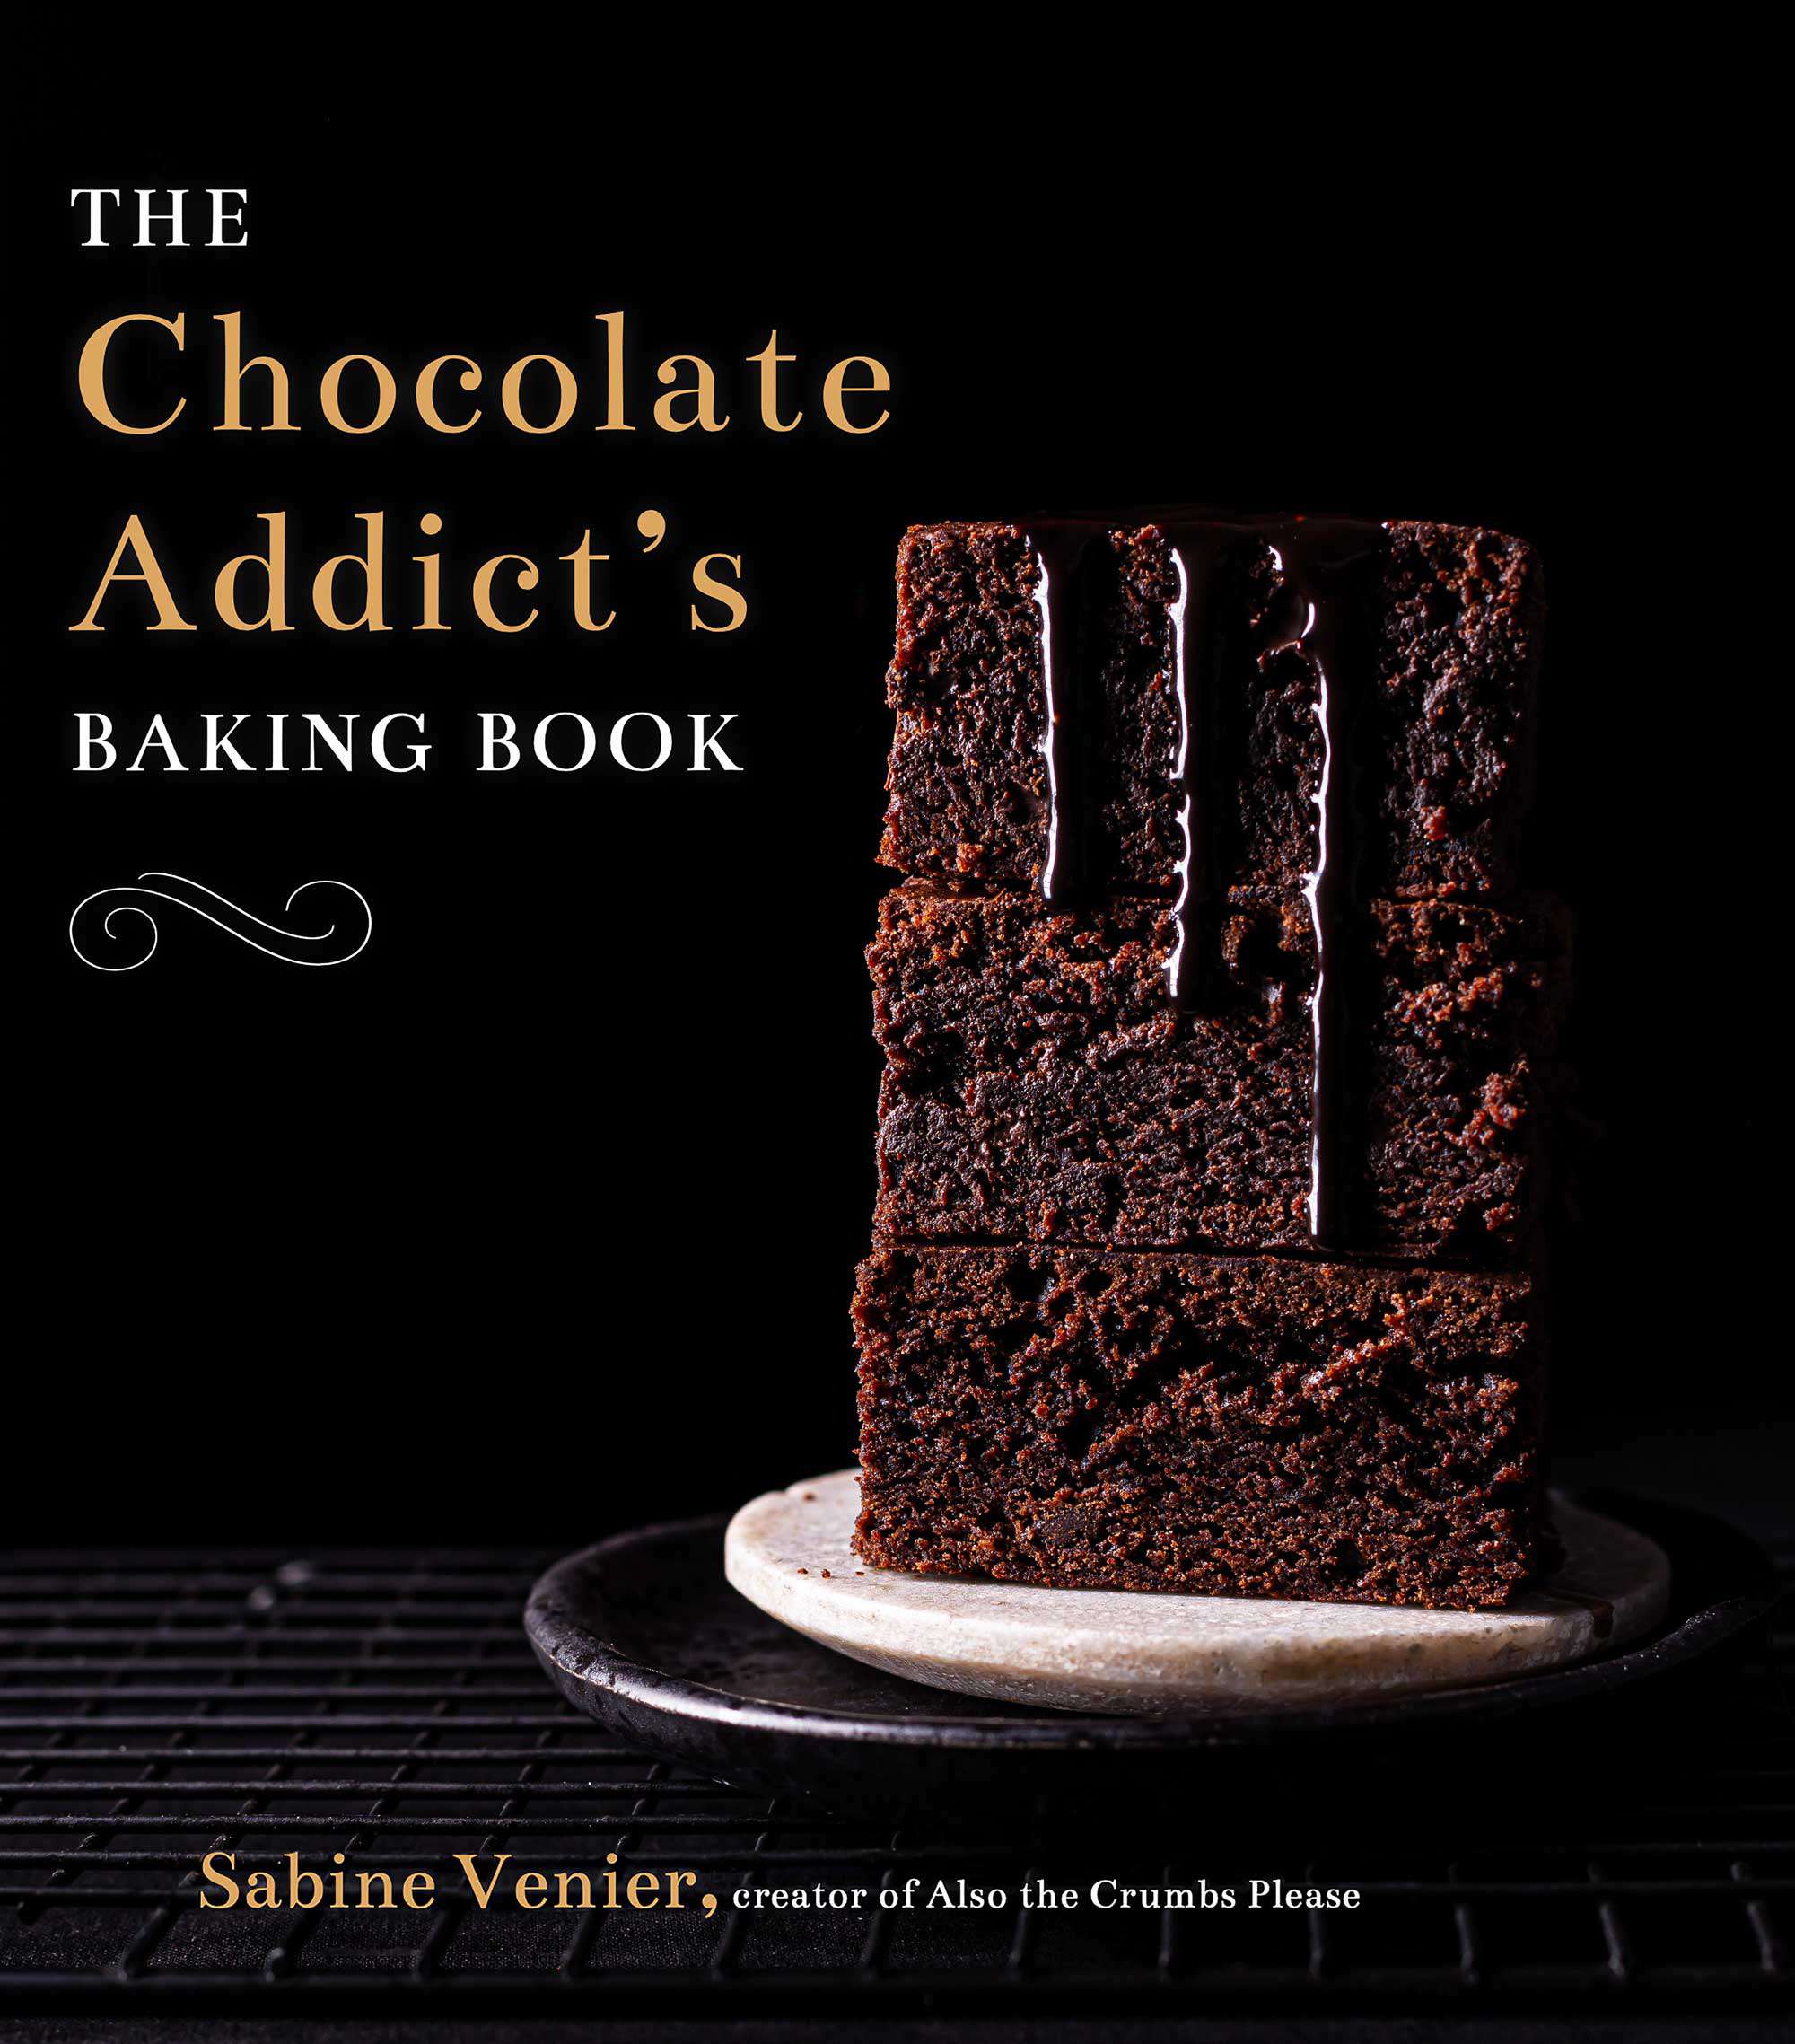 Cover page of the chocolate addicts baking book showing brownies on a dark background